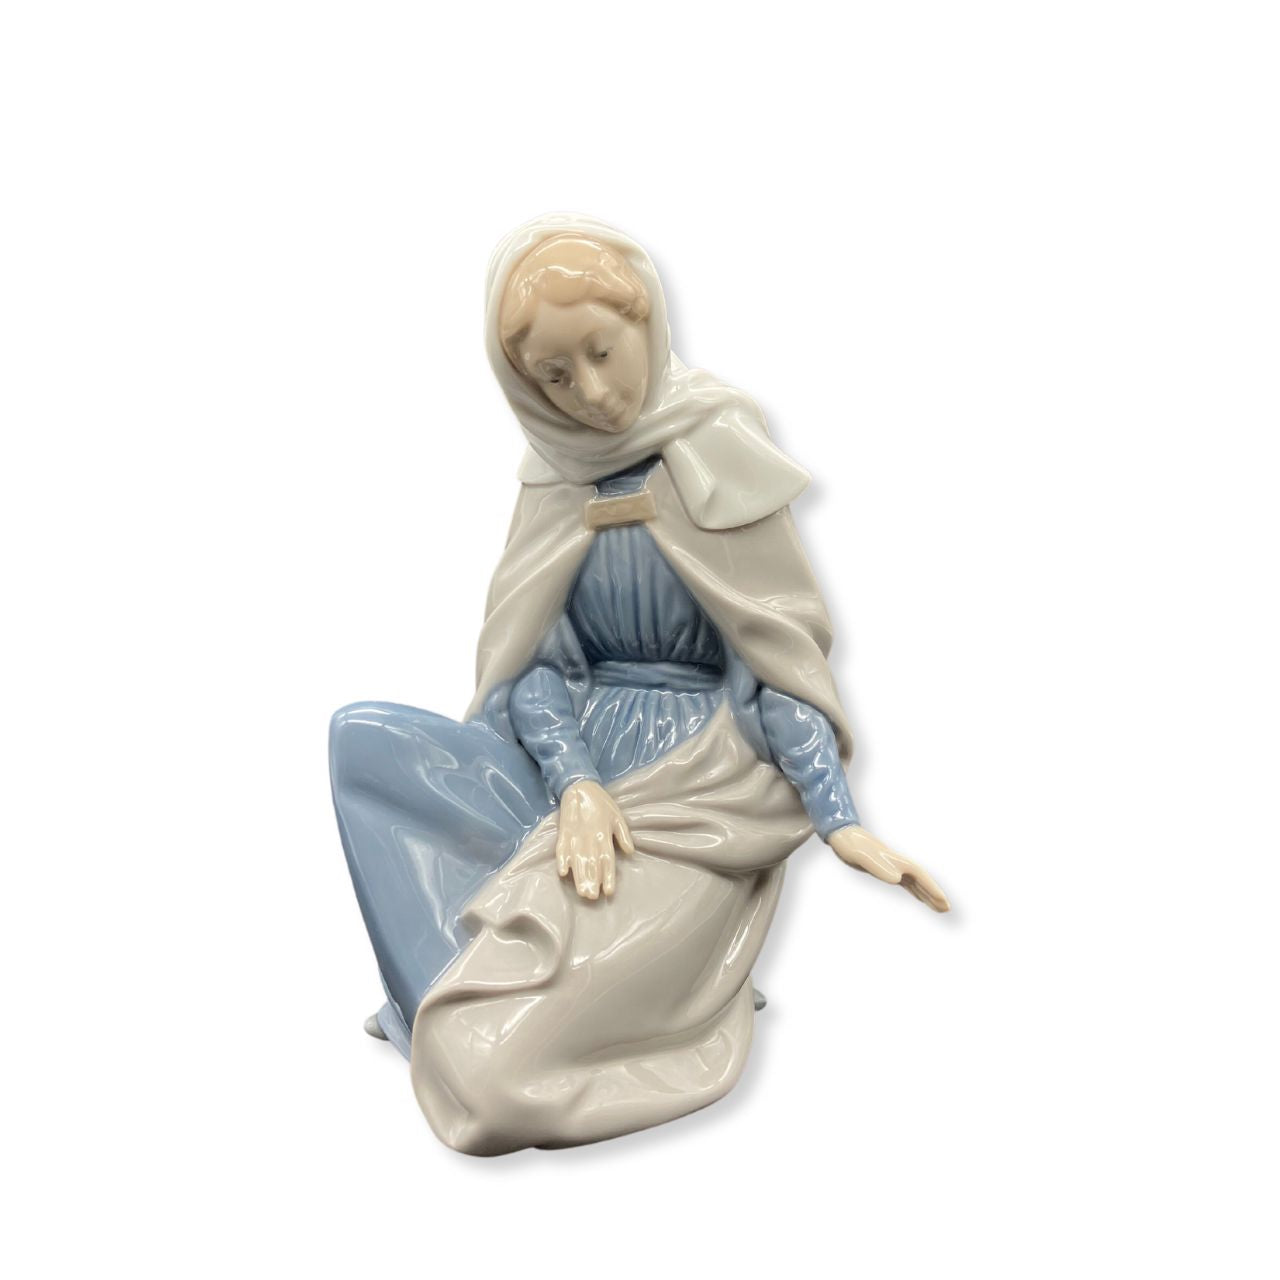 Nao by Lladro Virgin Mary  Nao porcelain figurine “Virgin Mary” from the Christmas Collection.  Sculpted by Salvador Furió, this figurine is part of the nativity set.  Nao Porcelain Figurines are produced in Valencia Spain and the Company is part of the Lladro family. Each piece is lovingly handmade and hand painted by the Valencia Artisans.